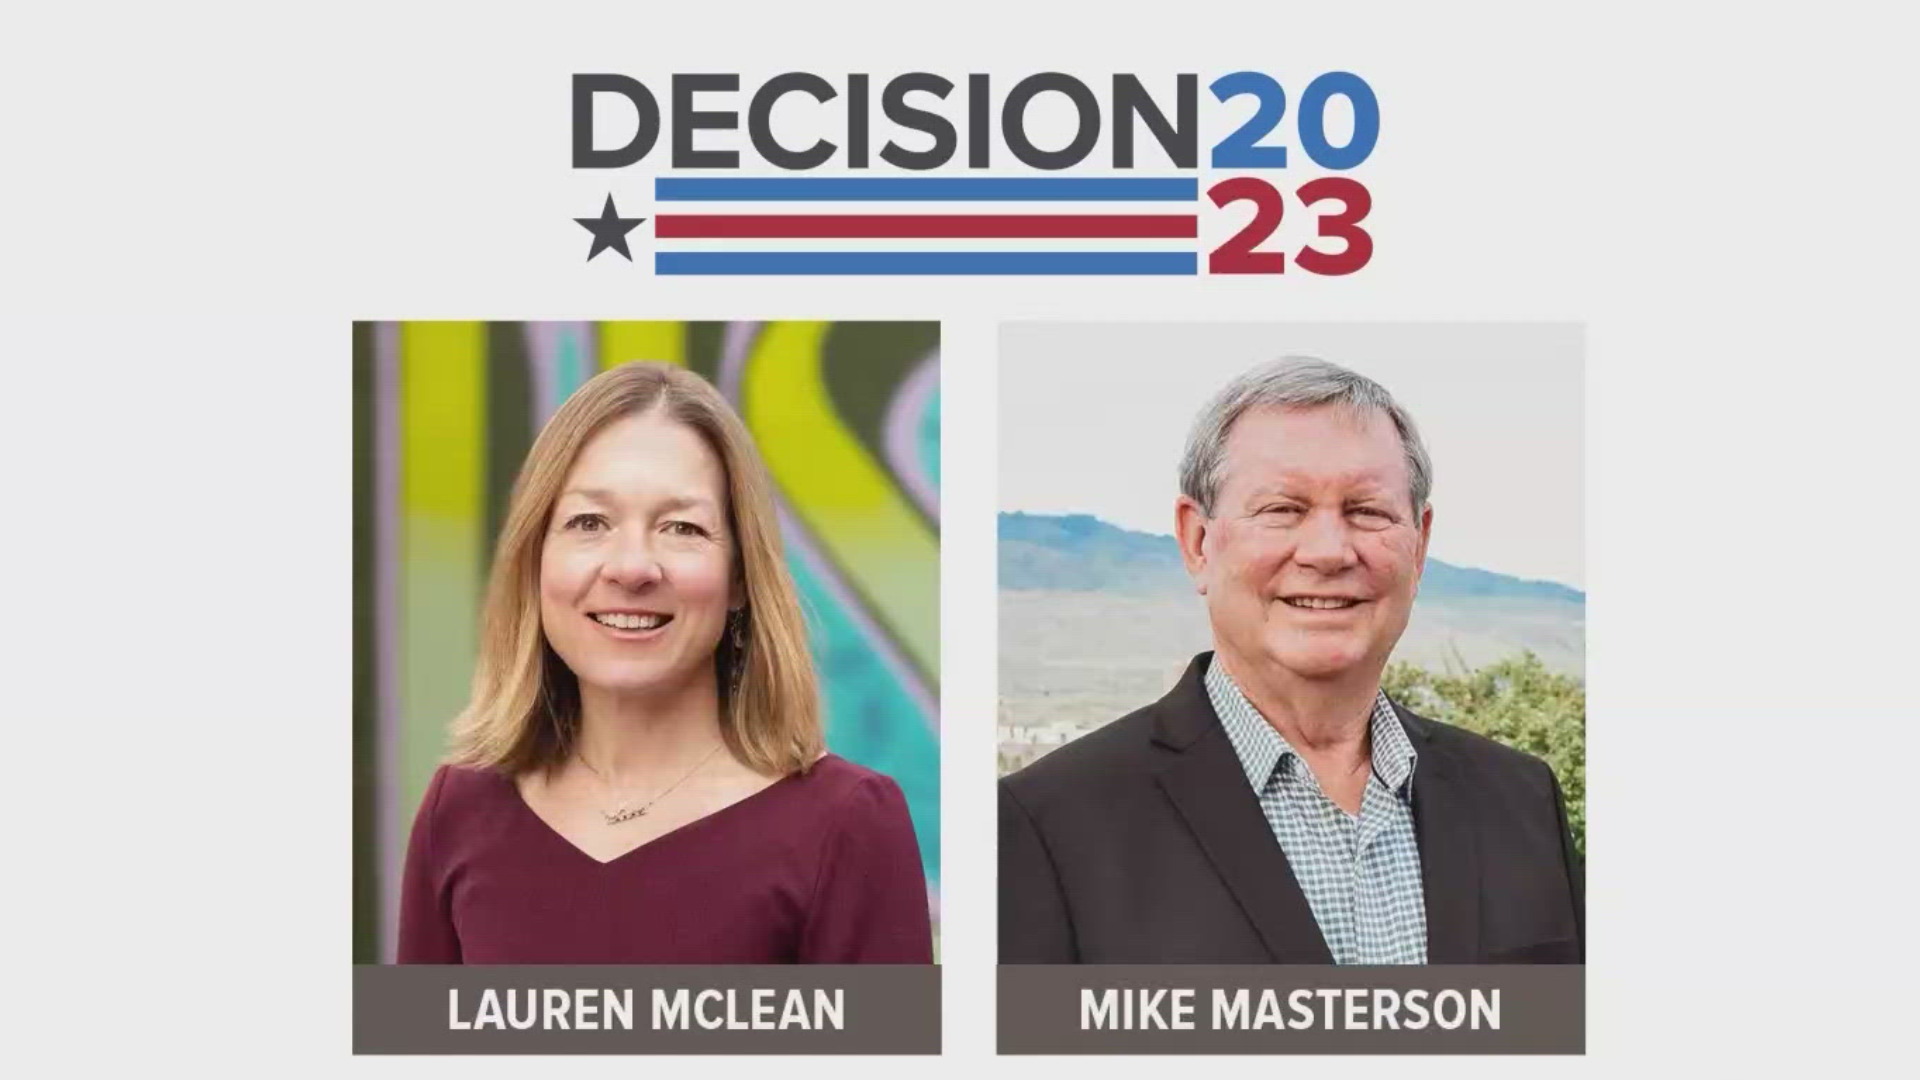 Incumbent Mayor Lauren McLean and retired Boise police chief Mike Masterson face off in a debate hosted by KTVB Idaho's Newschannel 7 on Tuesday, Oct. 24, 2023.